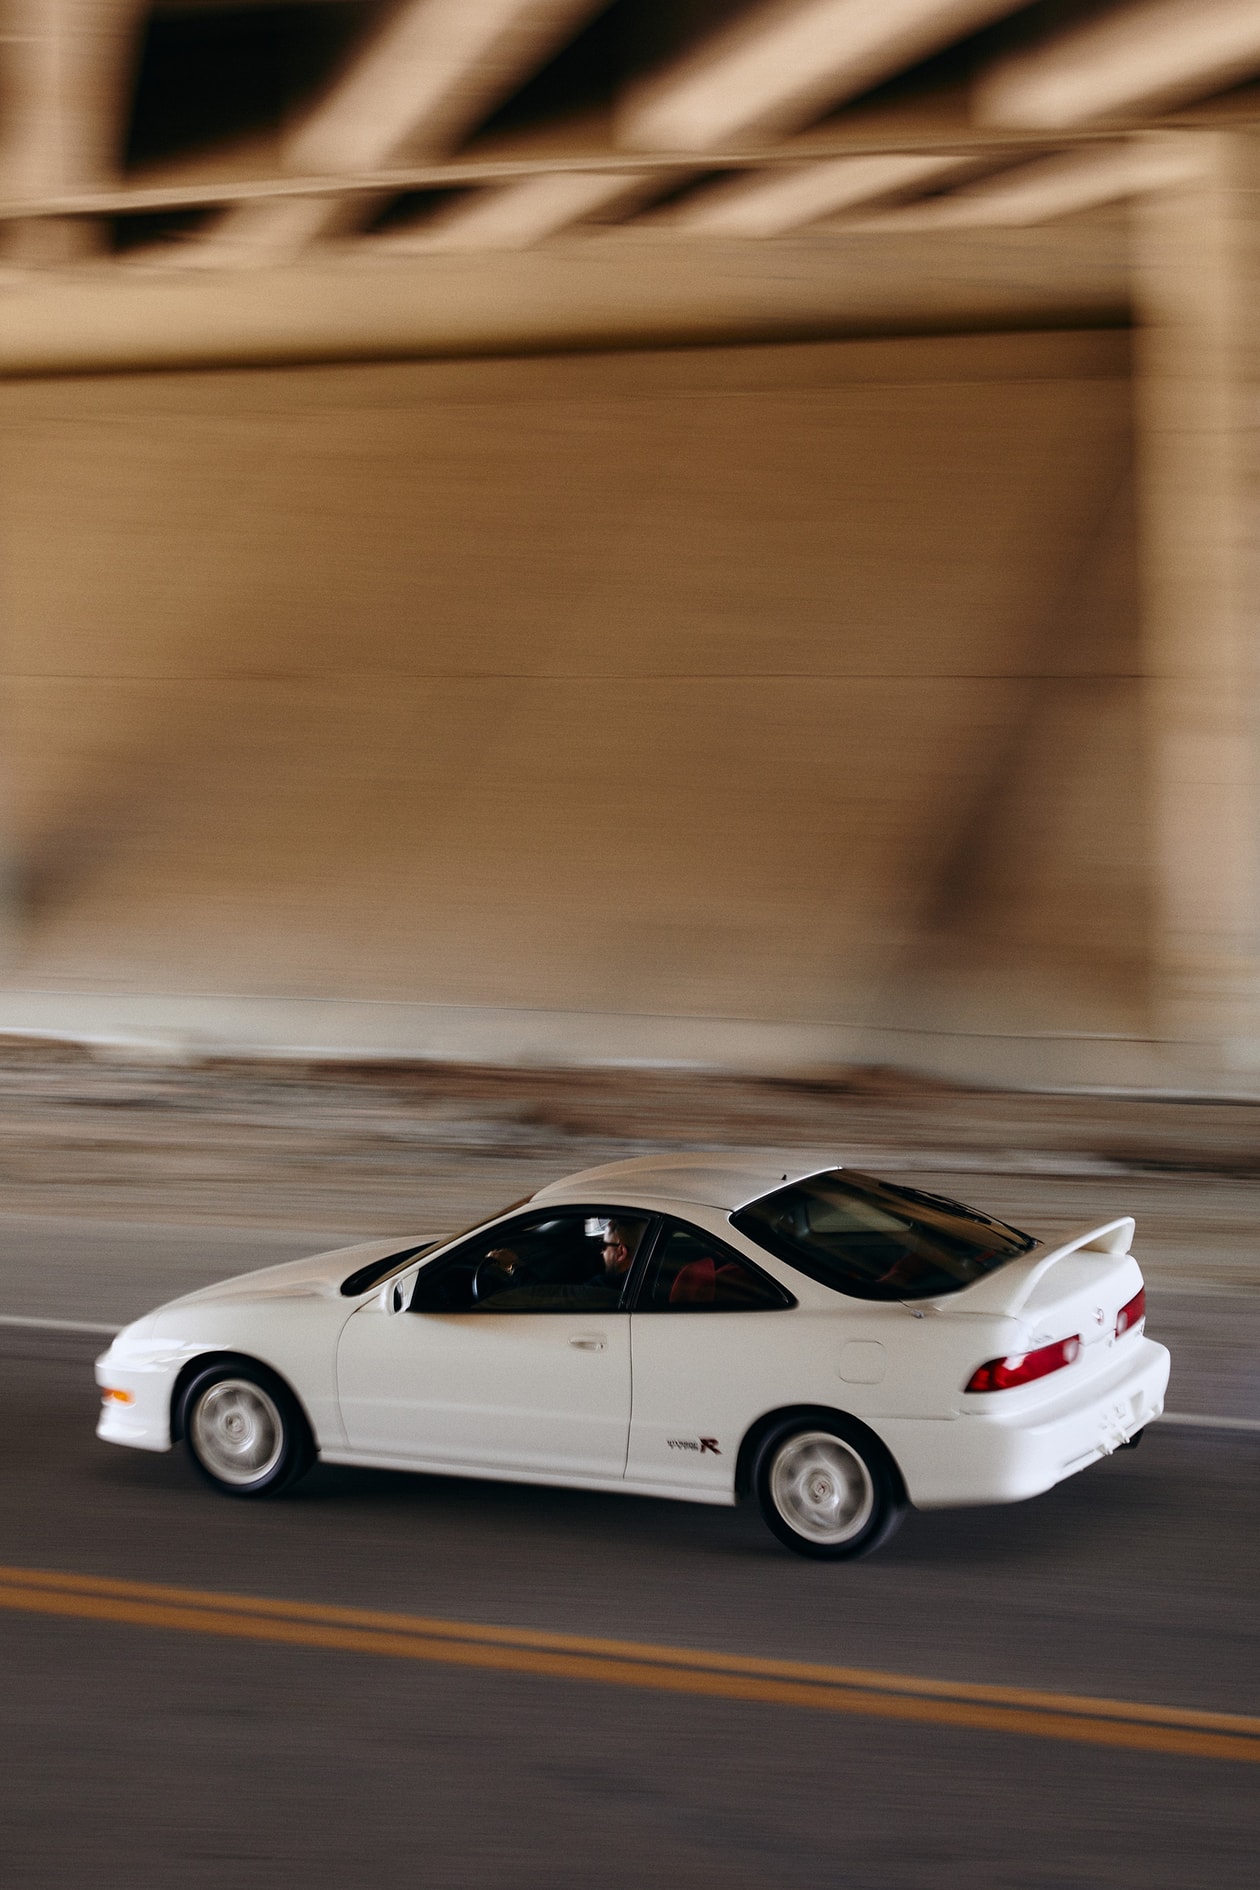 Joshua Vides and His 2001 Acura Integra Type R DRIVERS hypeart JDM Championship White